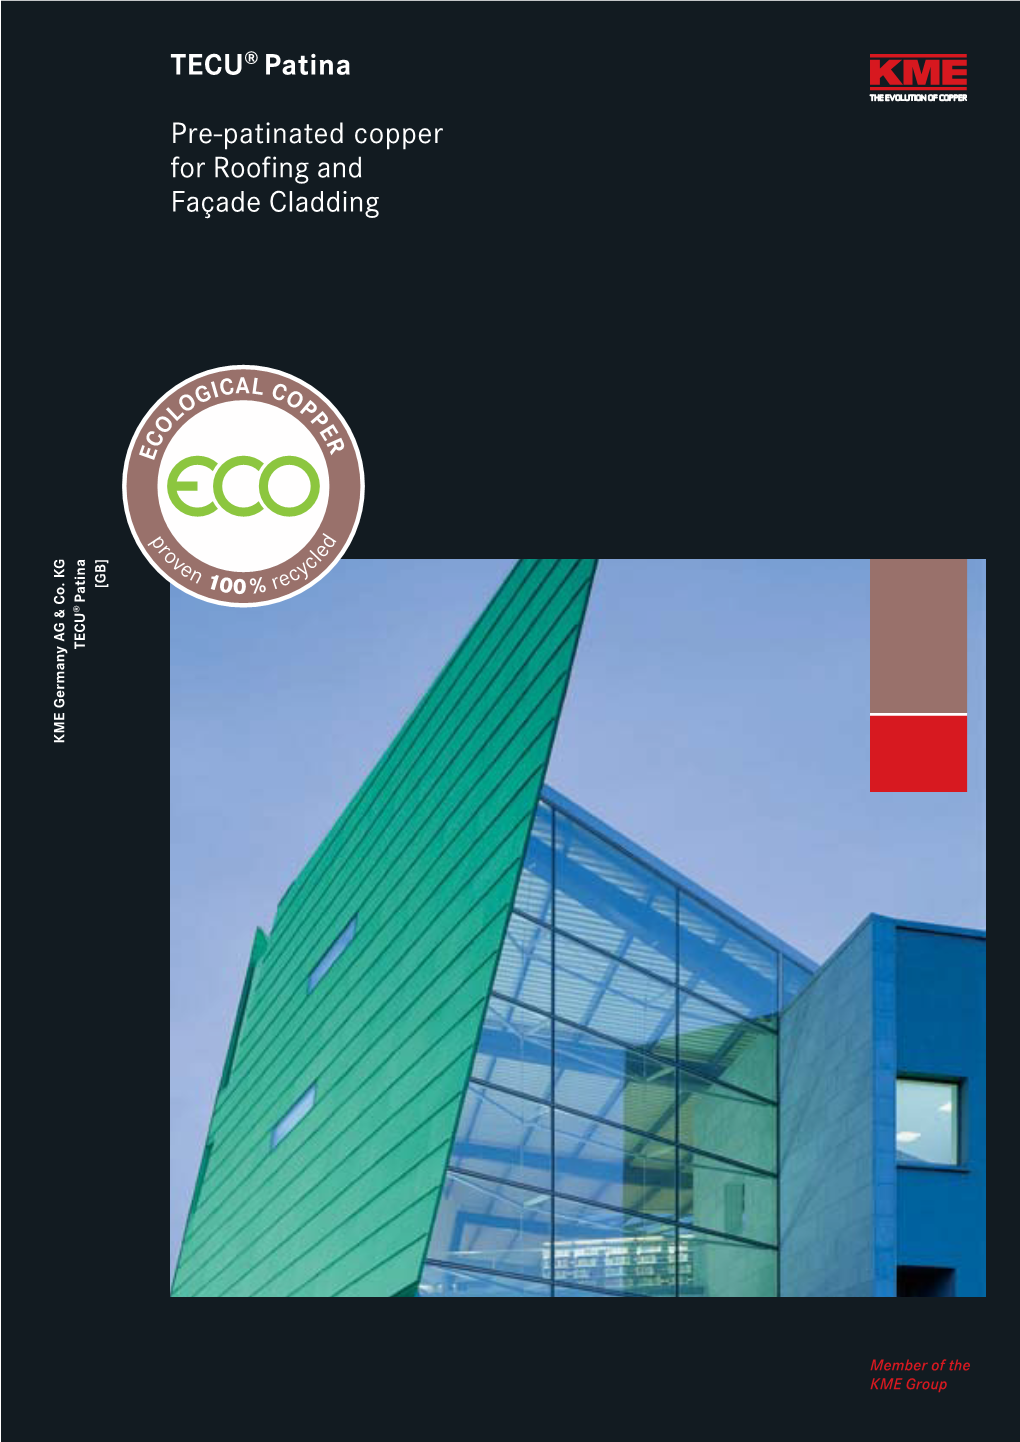 TECU® Patina Pre-Patinated Copper for Roofing and Façade Cladding